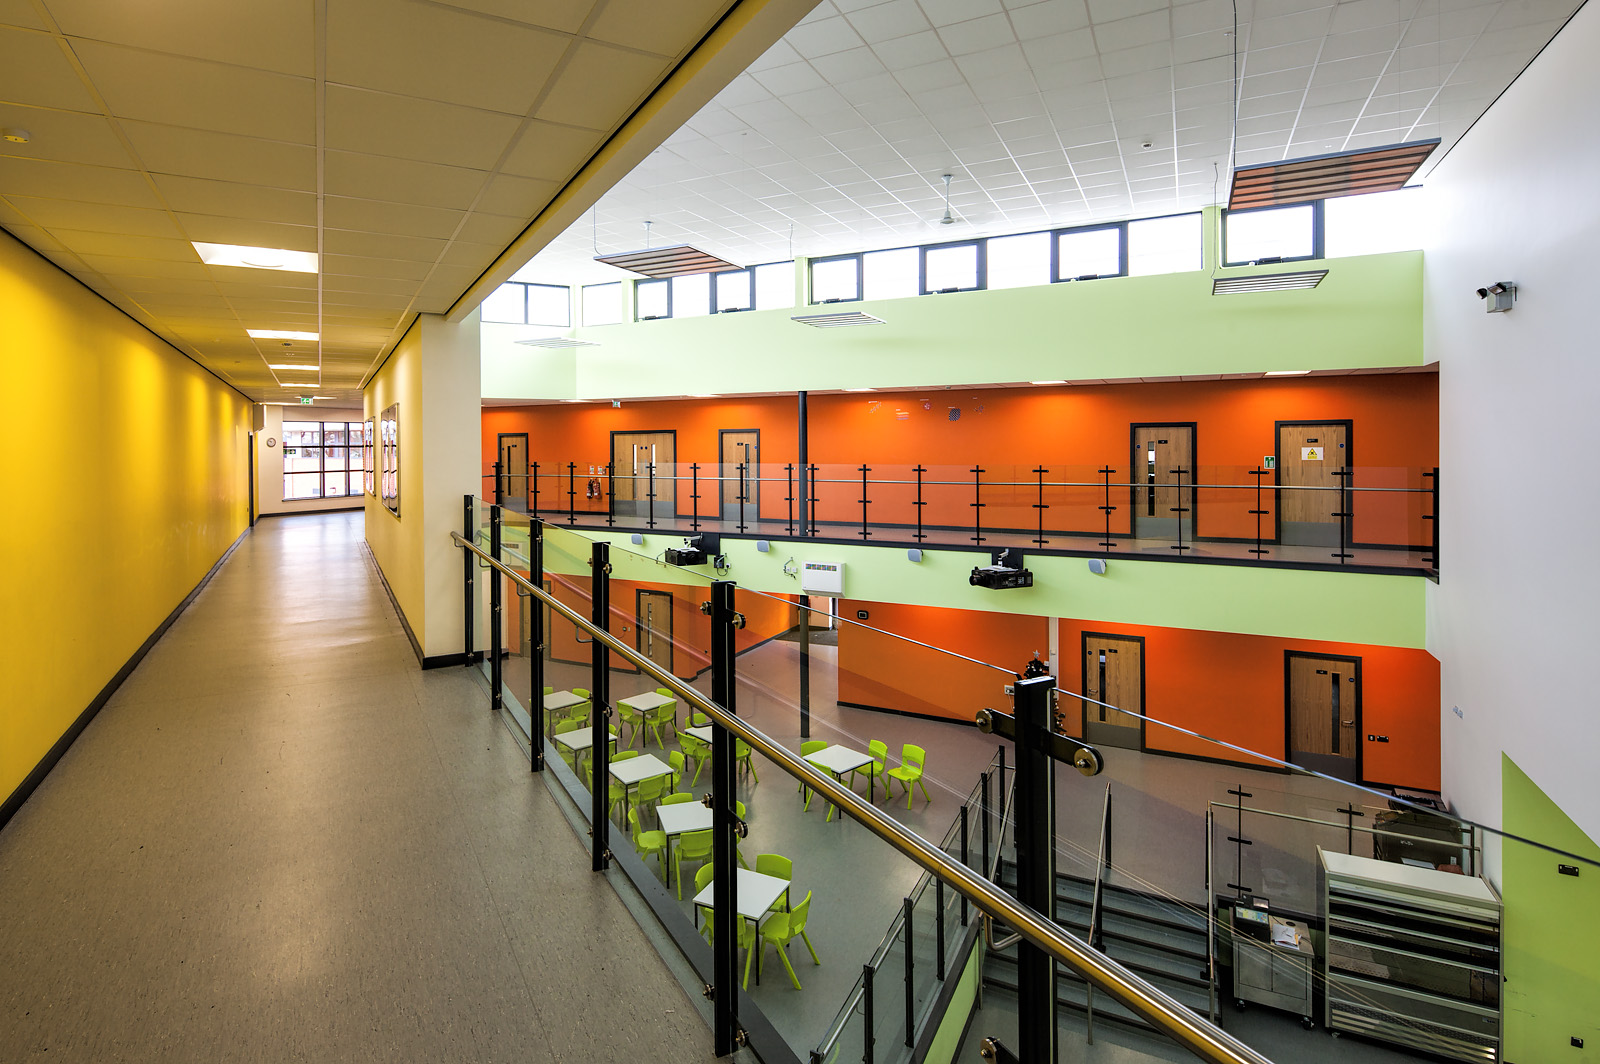 The open hallway area at a newly built school in Leicester